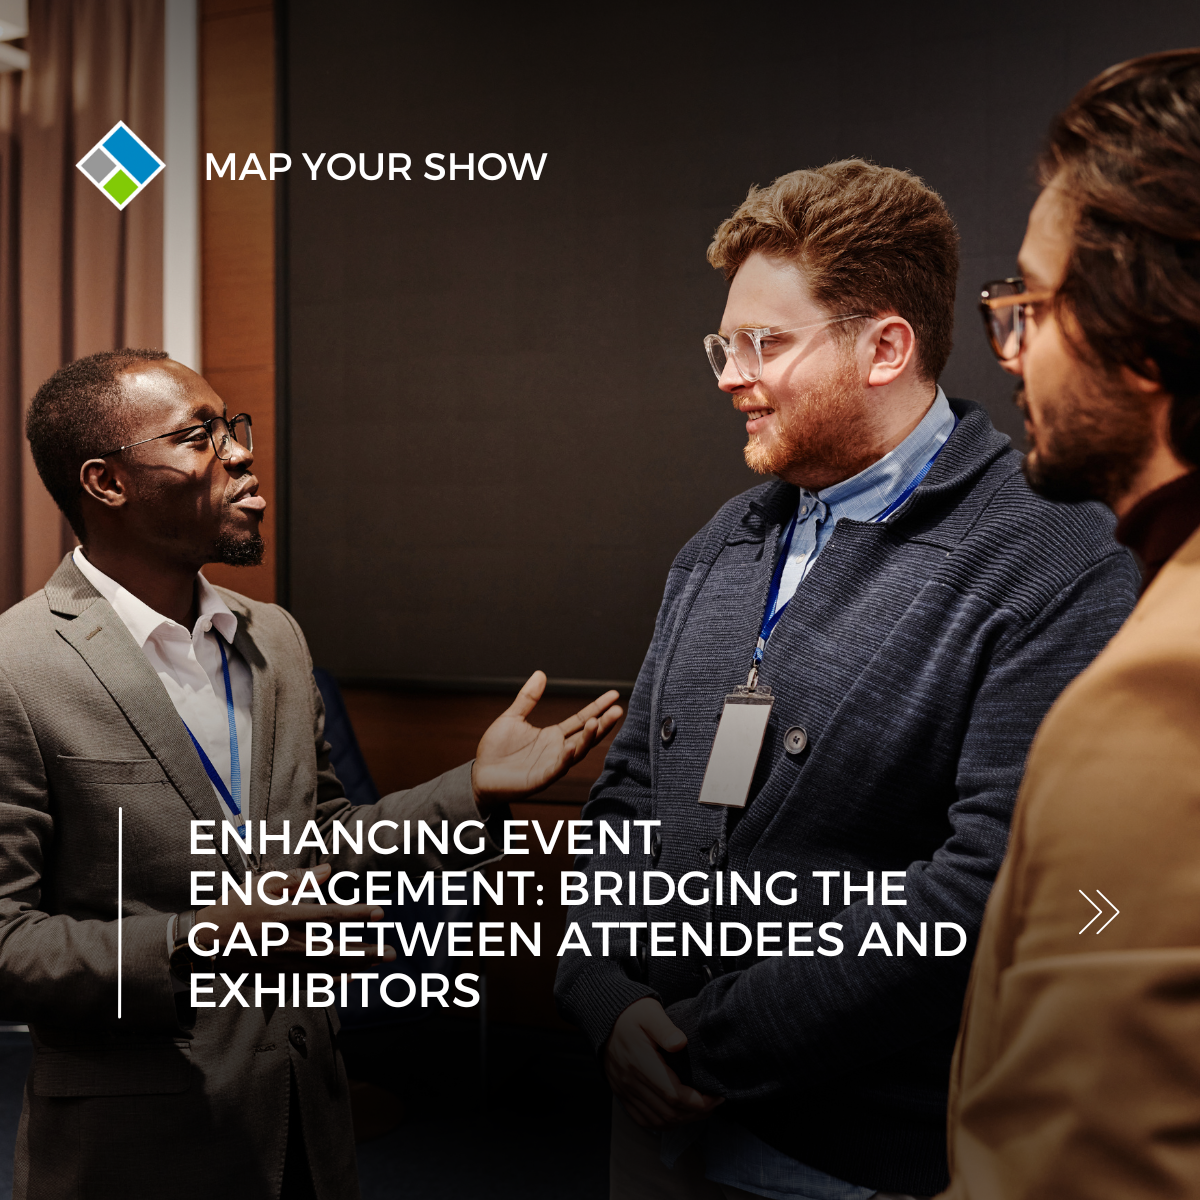 enhancing event engagement. bridging the gap between attendees and exhibitors. map your show. event management software. event mobile app